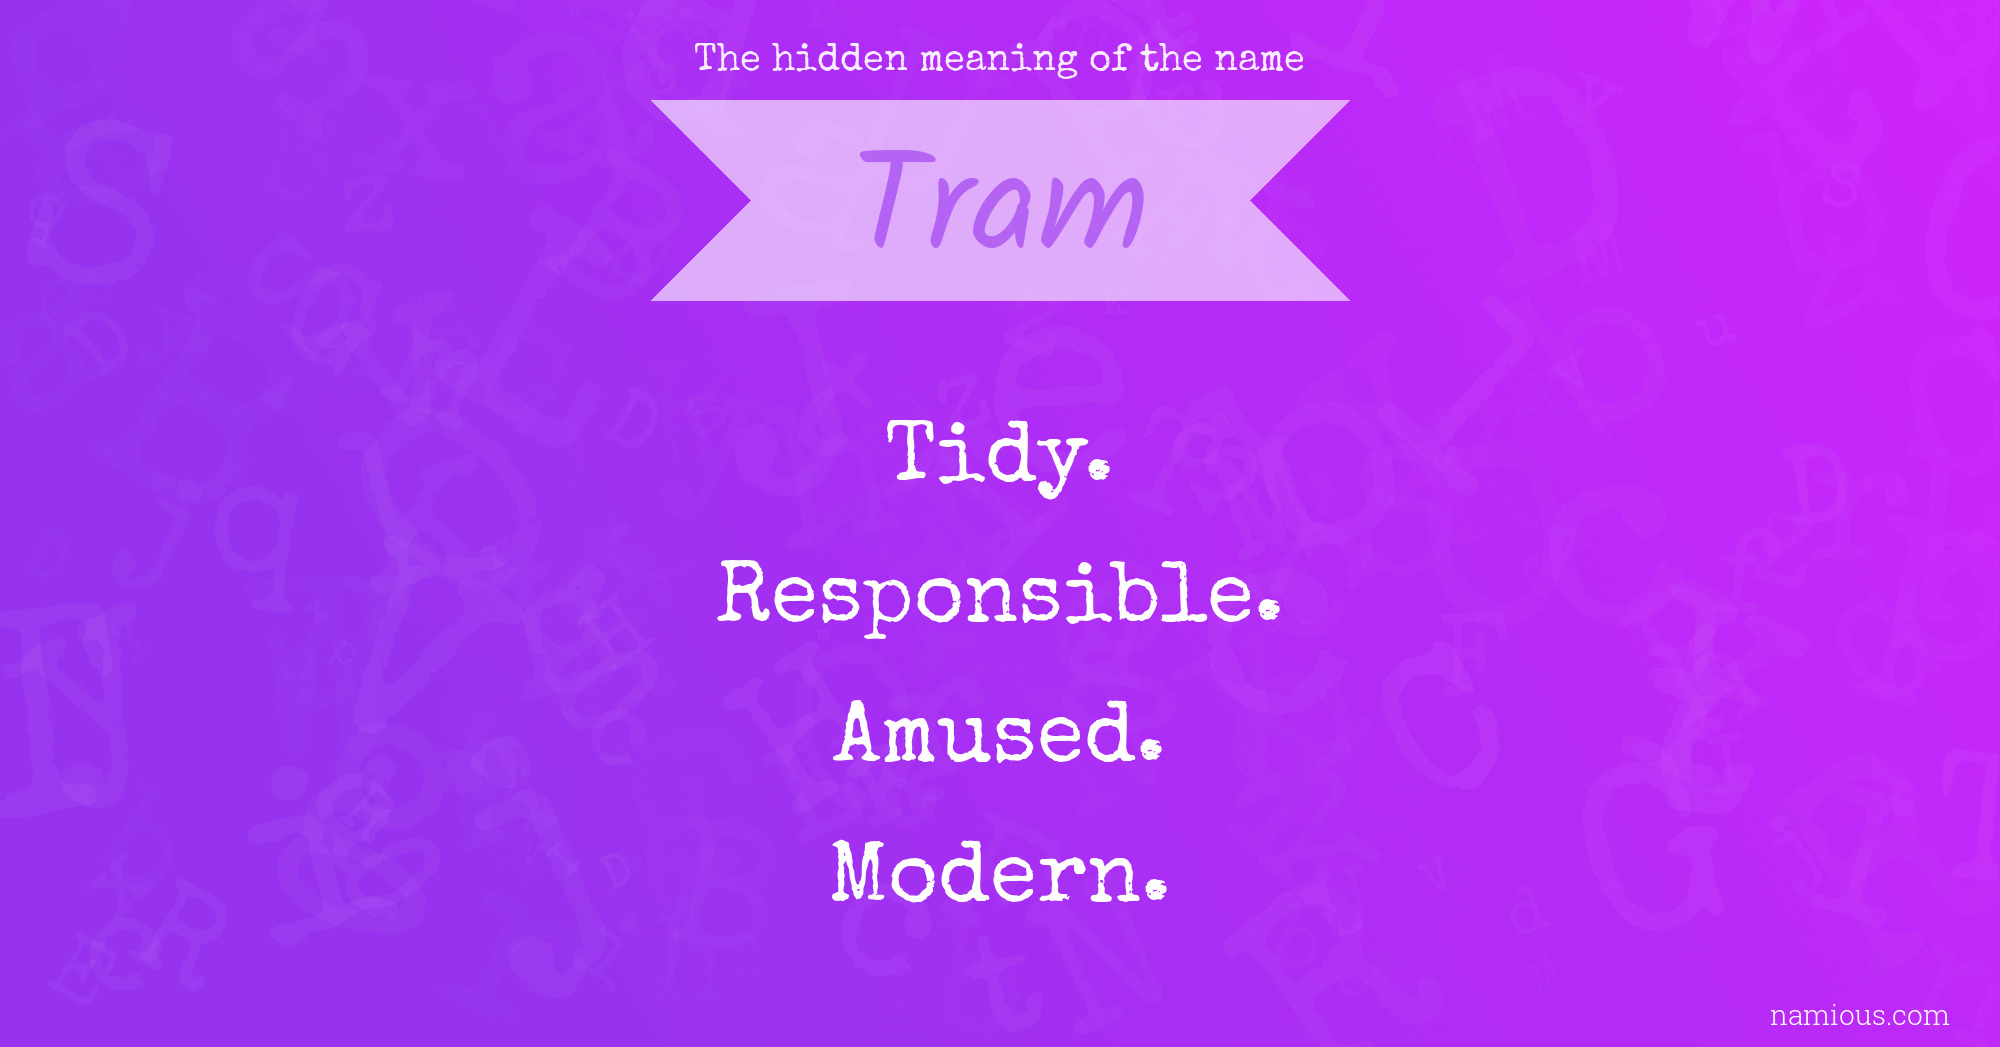 The hidden meaning of the name Tram